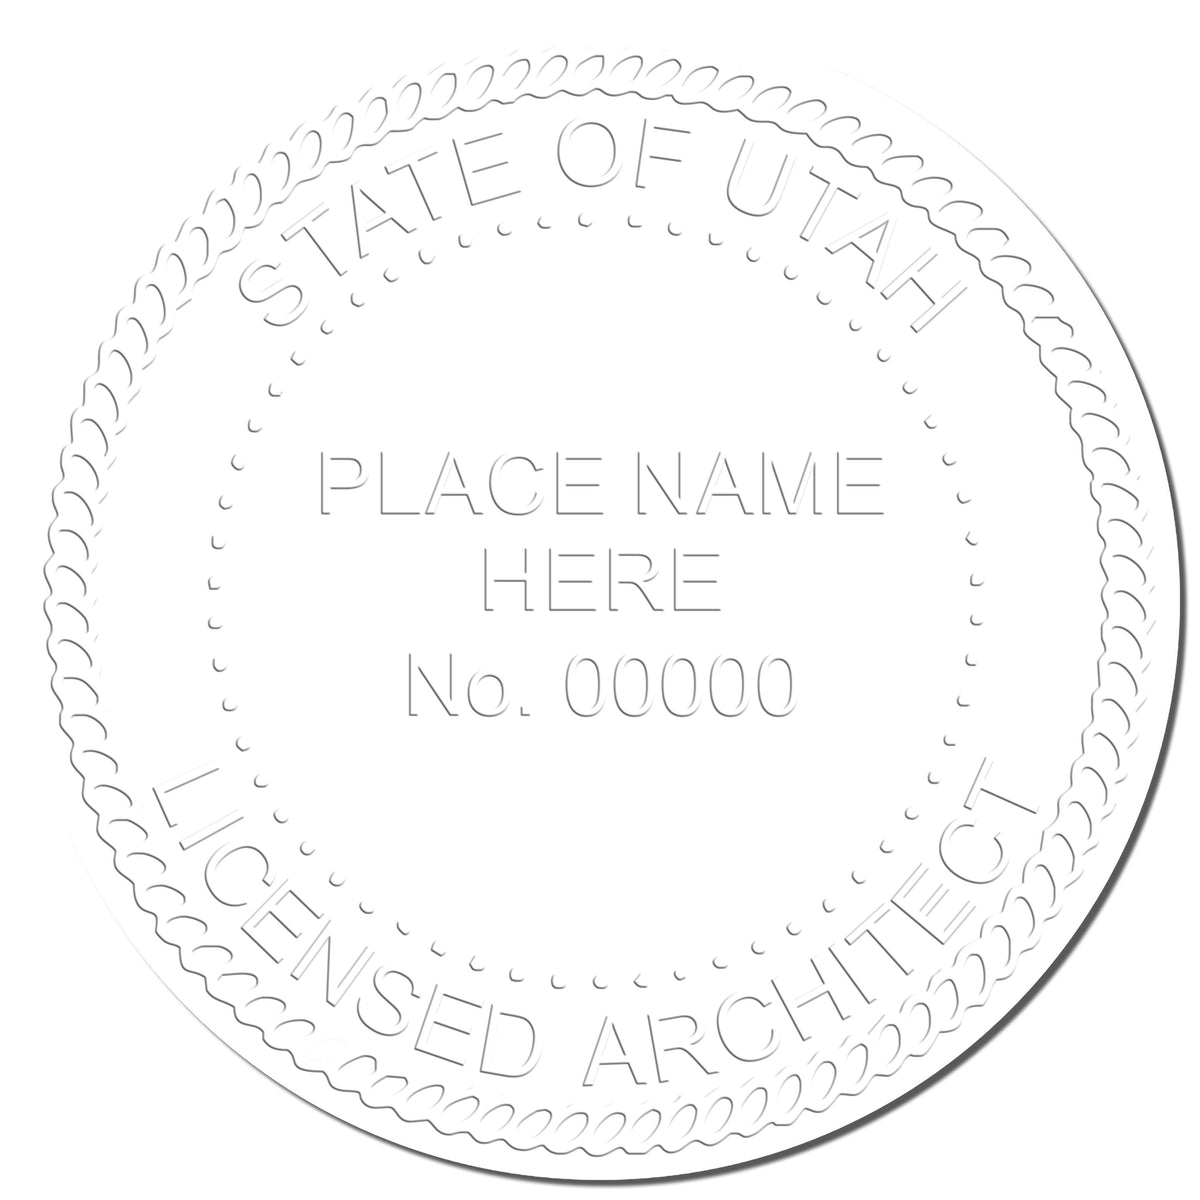 This paper is stamped with a sample imprint of the Gift Utah Architect Seal, signifying its quality and reliability.